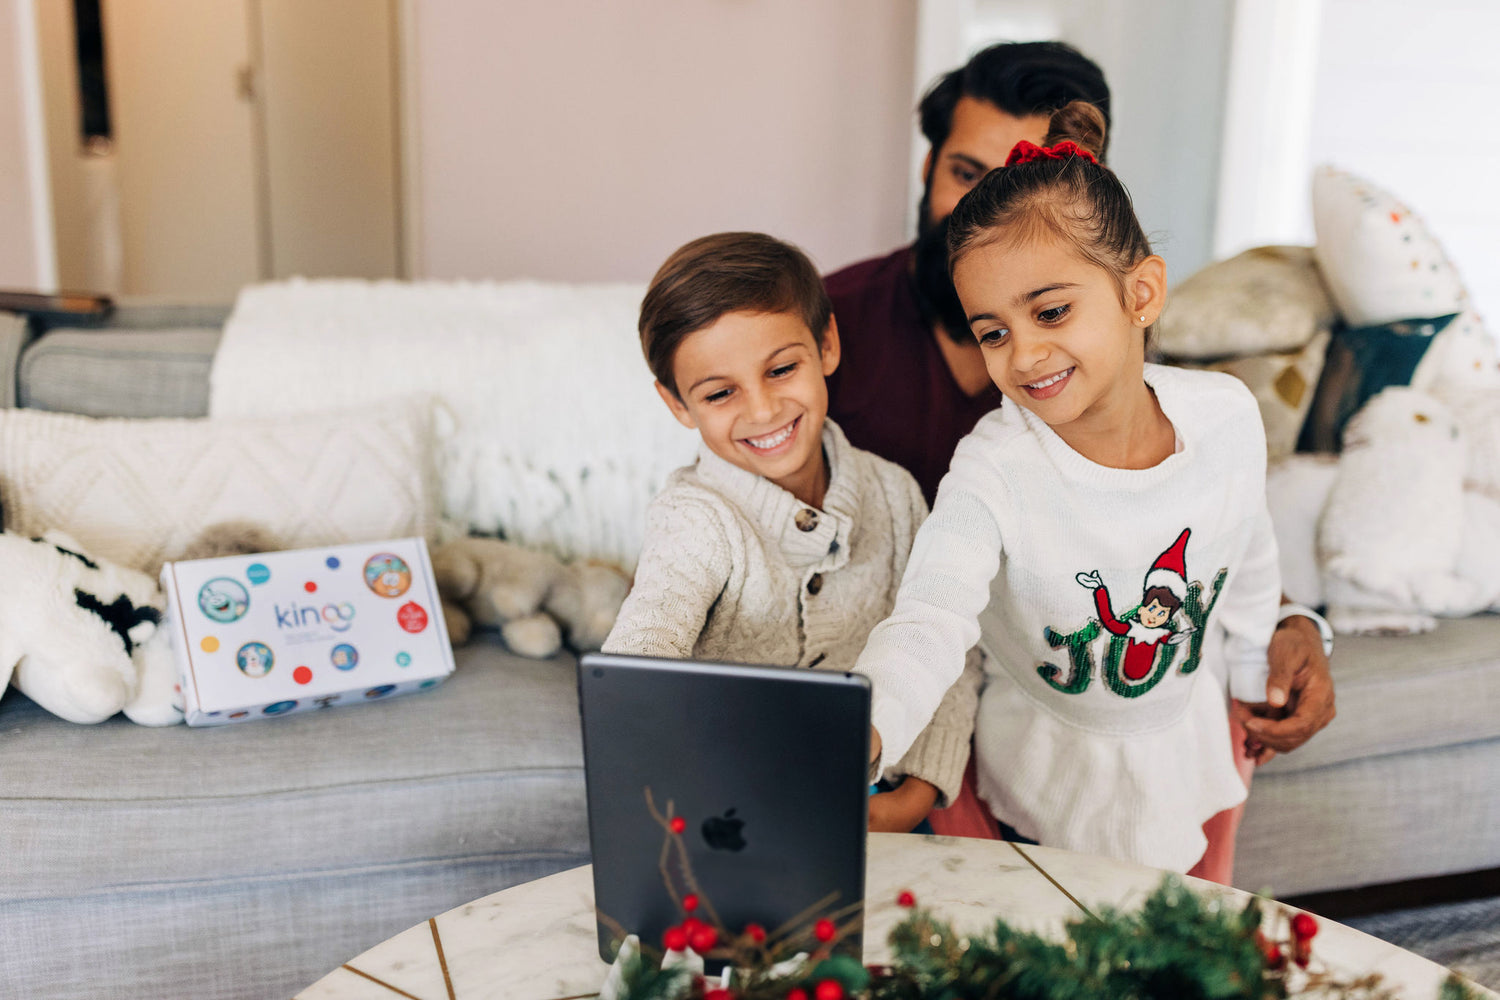 10 Creative Ways To Stay Connected With Family Virtually